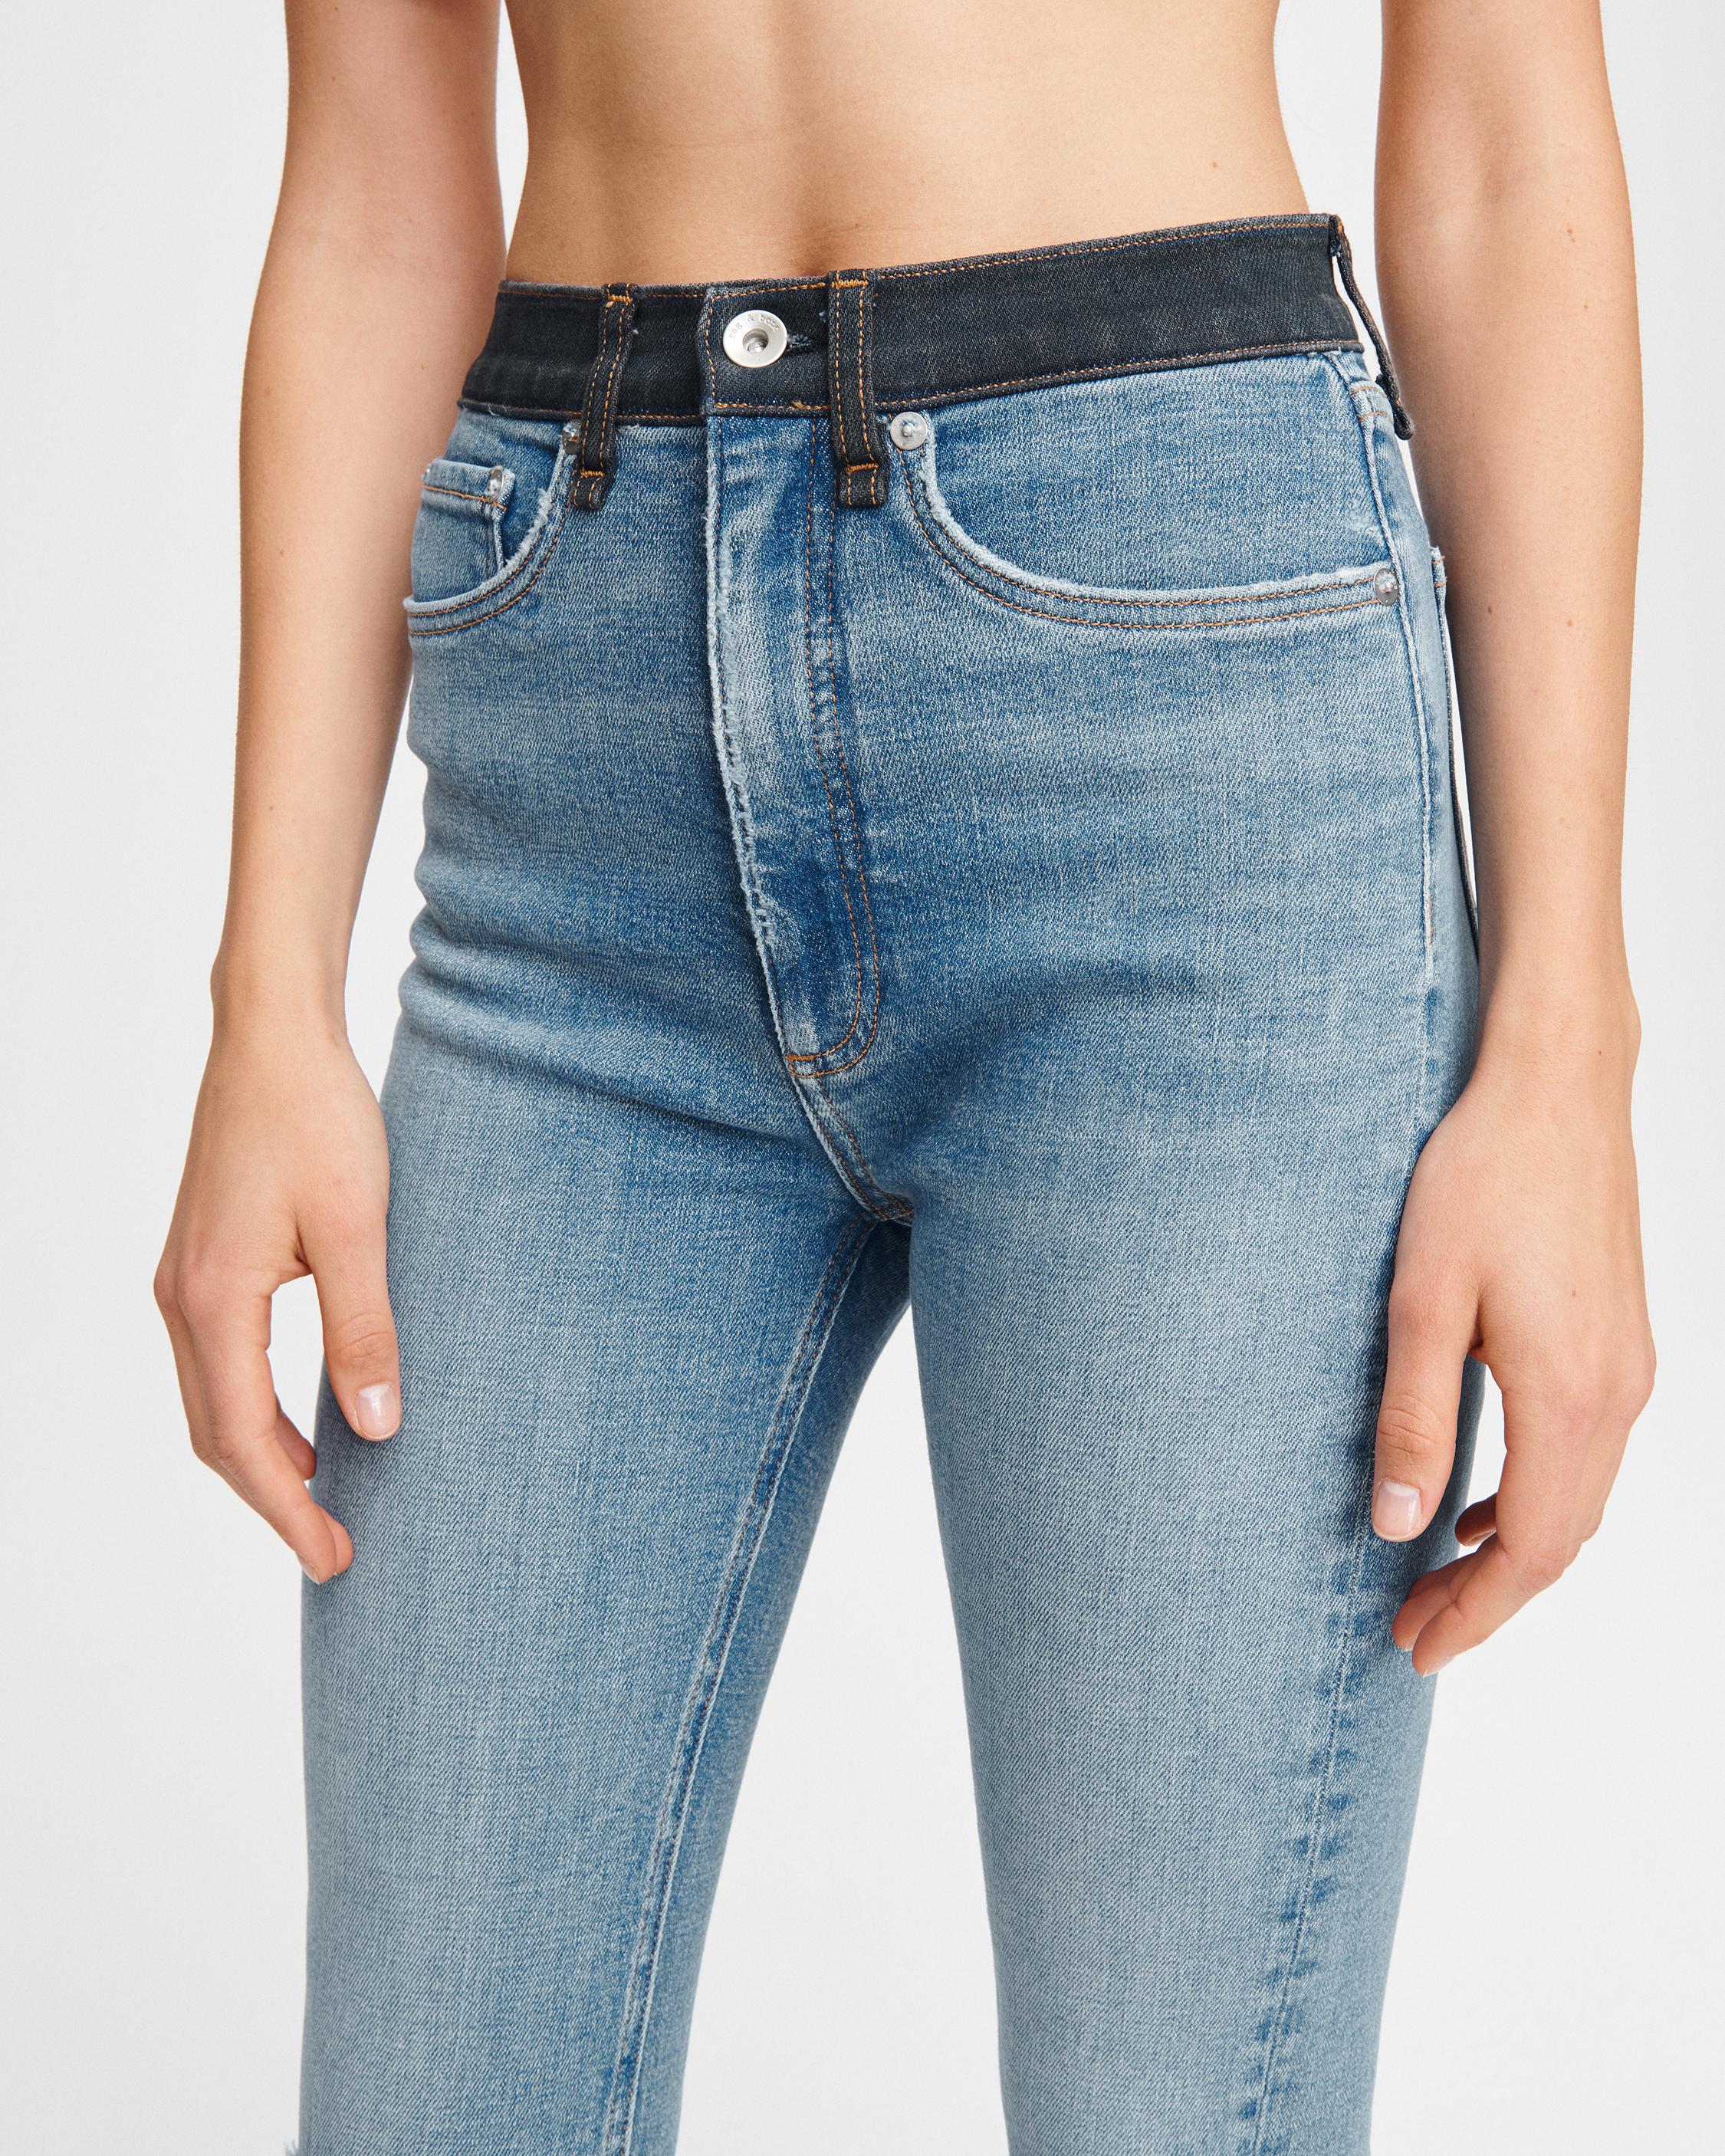 Jane Super High-Rise Ankle Length Jeans in Mid-Indigo